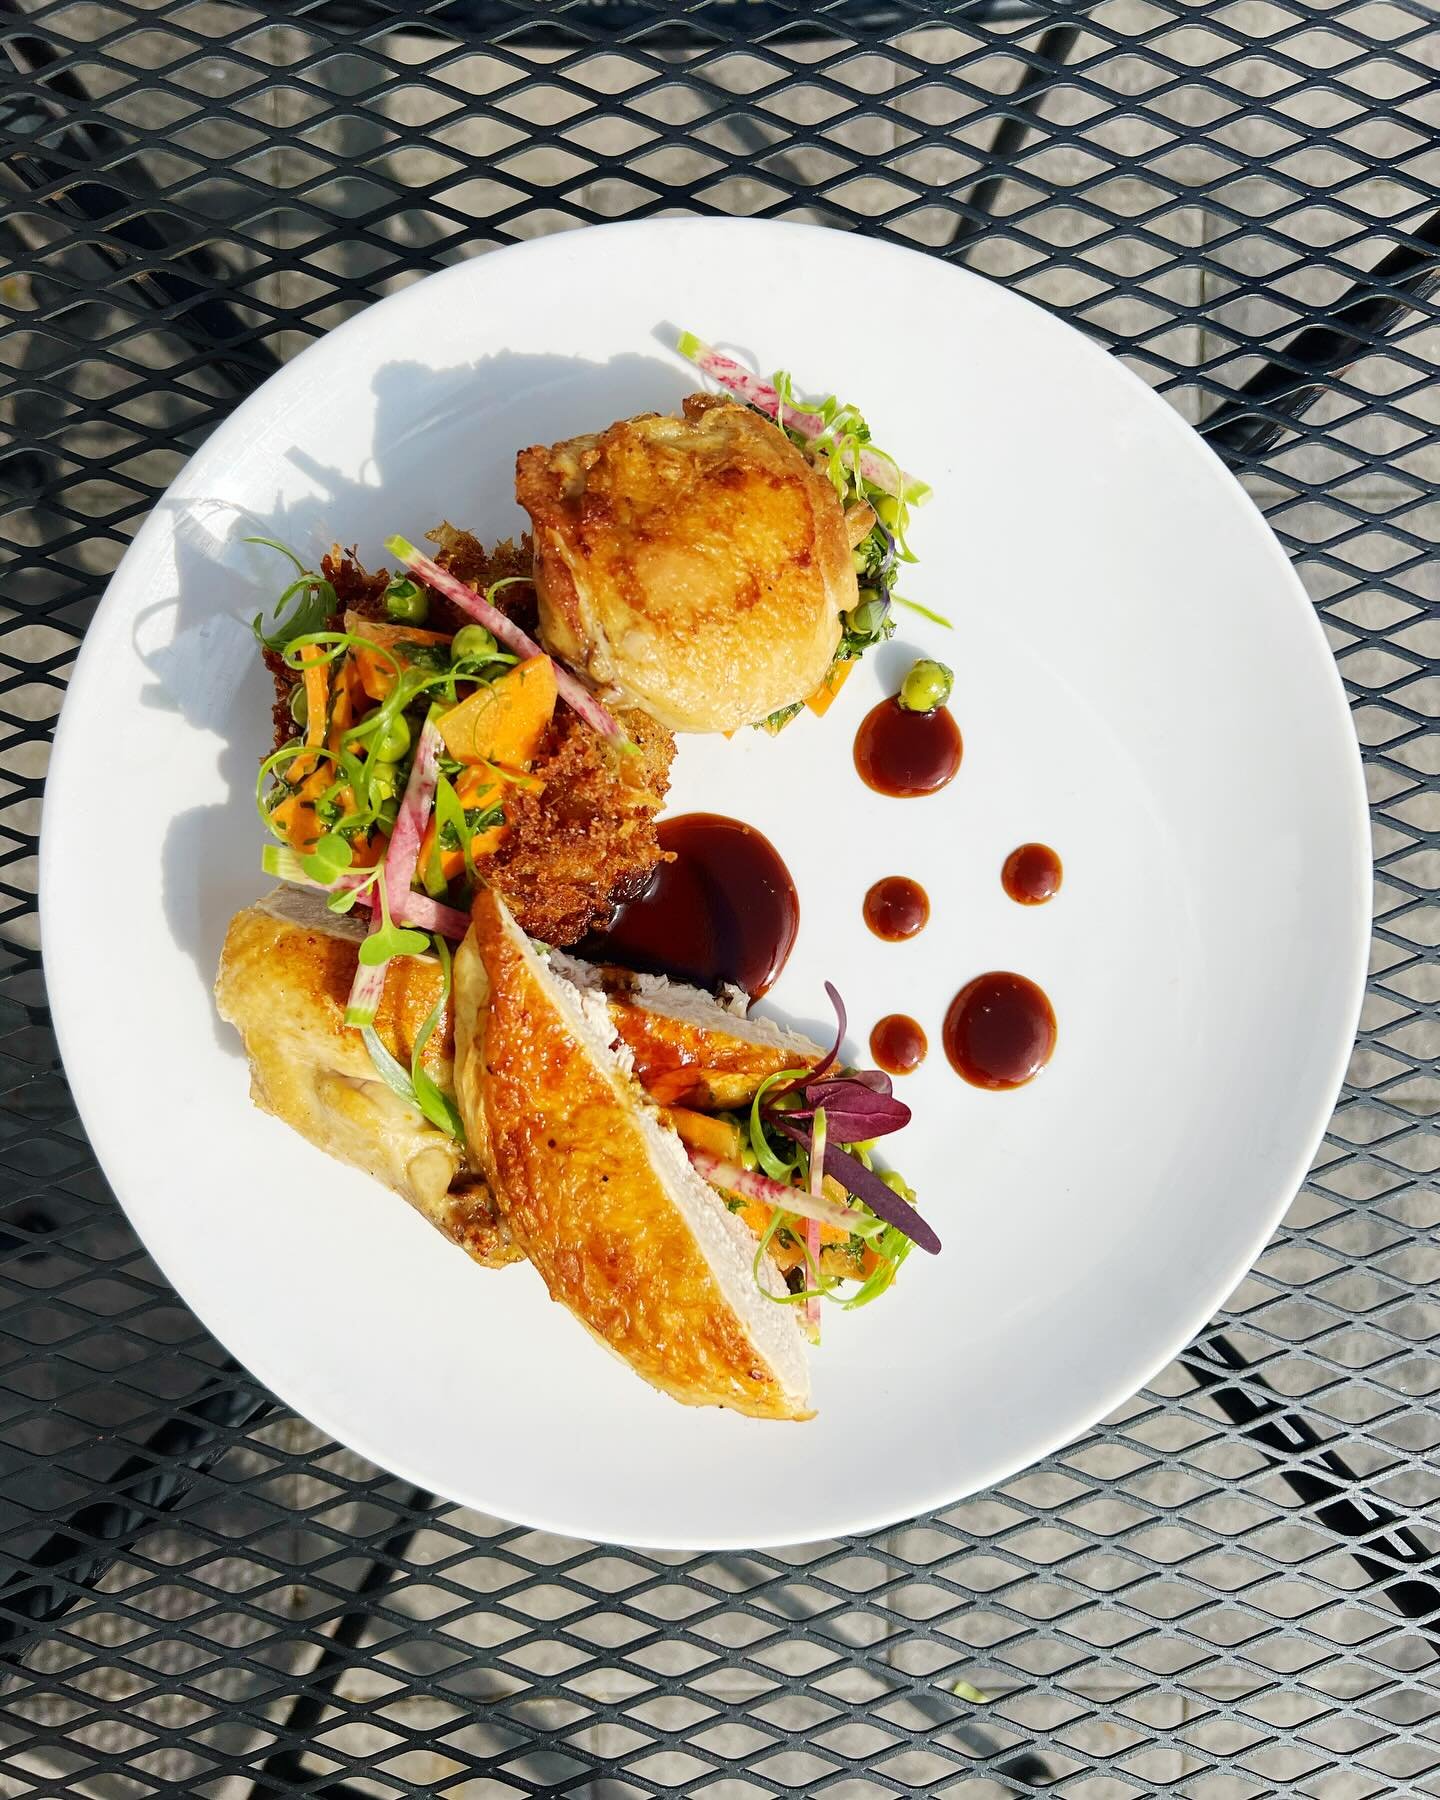 🪴☀️ R I S E &amp;  S H I N E ☀️🪴

back on our menu, the oh-so-delicious 

pan roasted organic lancaster chicken
crispy latke with a honey cured egg yolk
english pea &amp; pickled carrot salsa verde
english pea risotto
chicken demi

🪴🌷🍄🌸🌿🪻

th